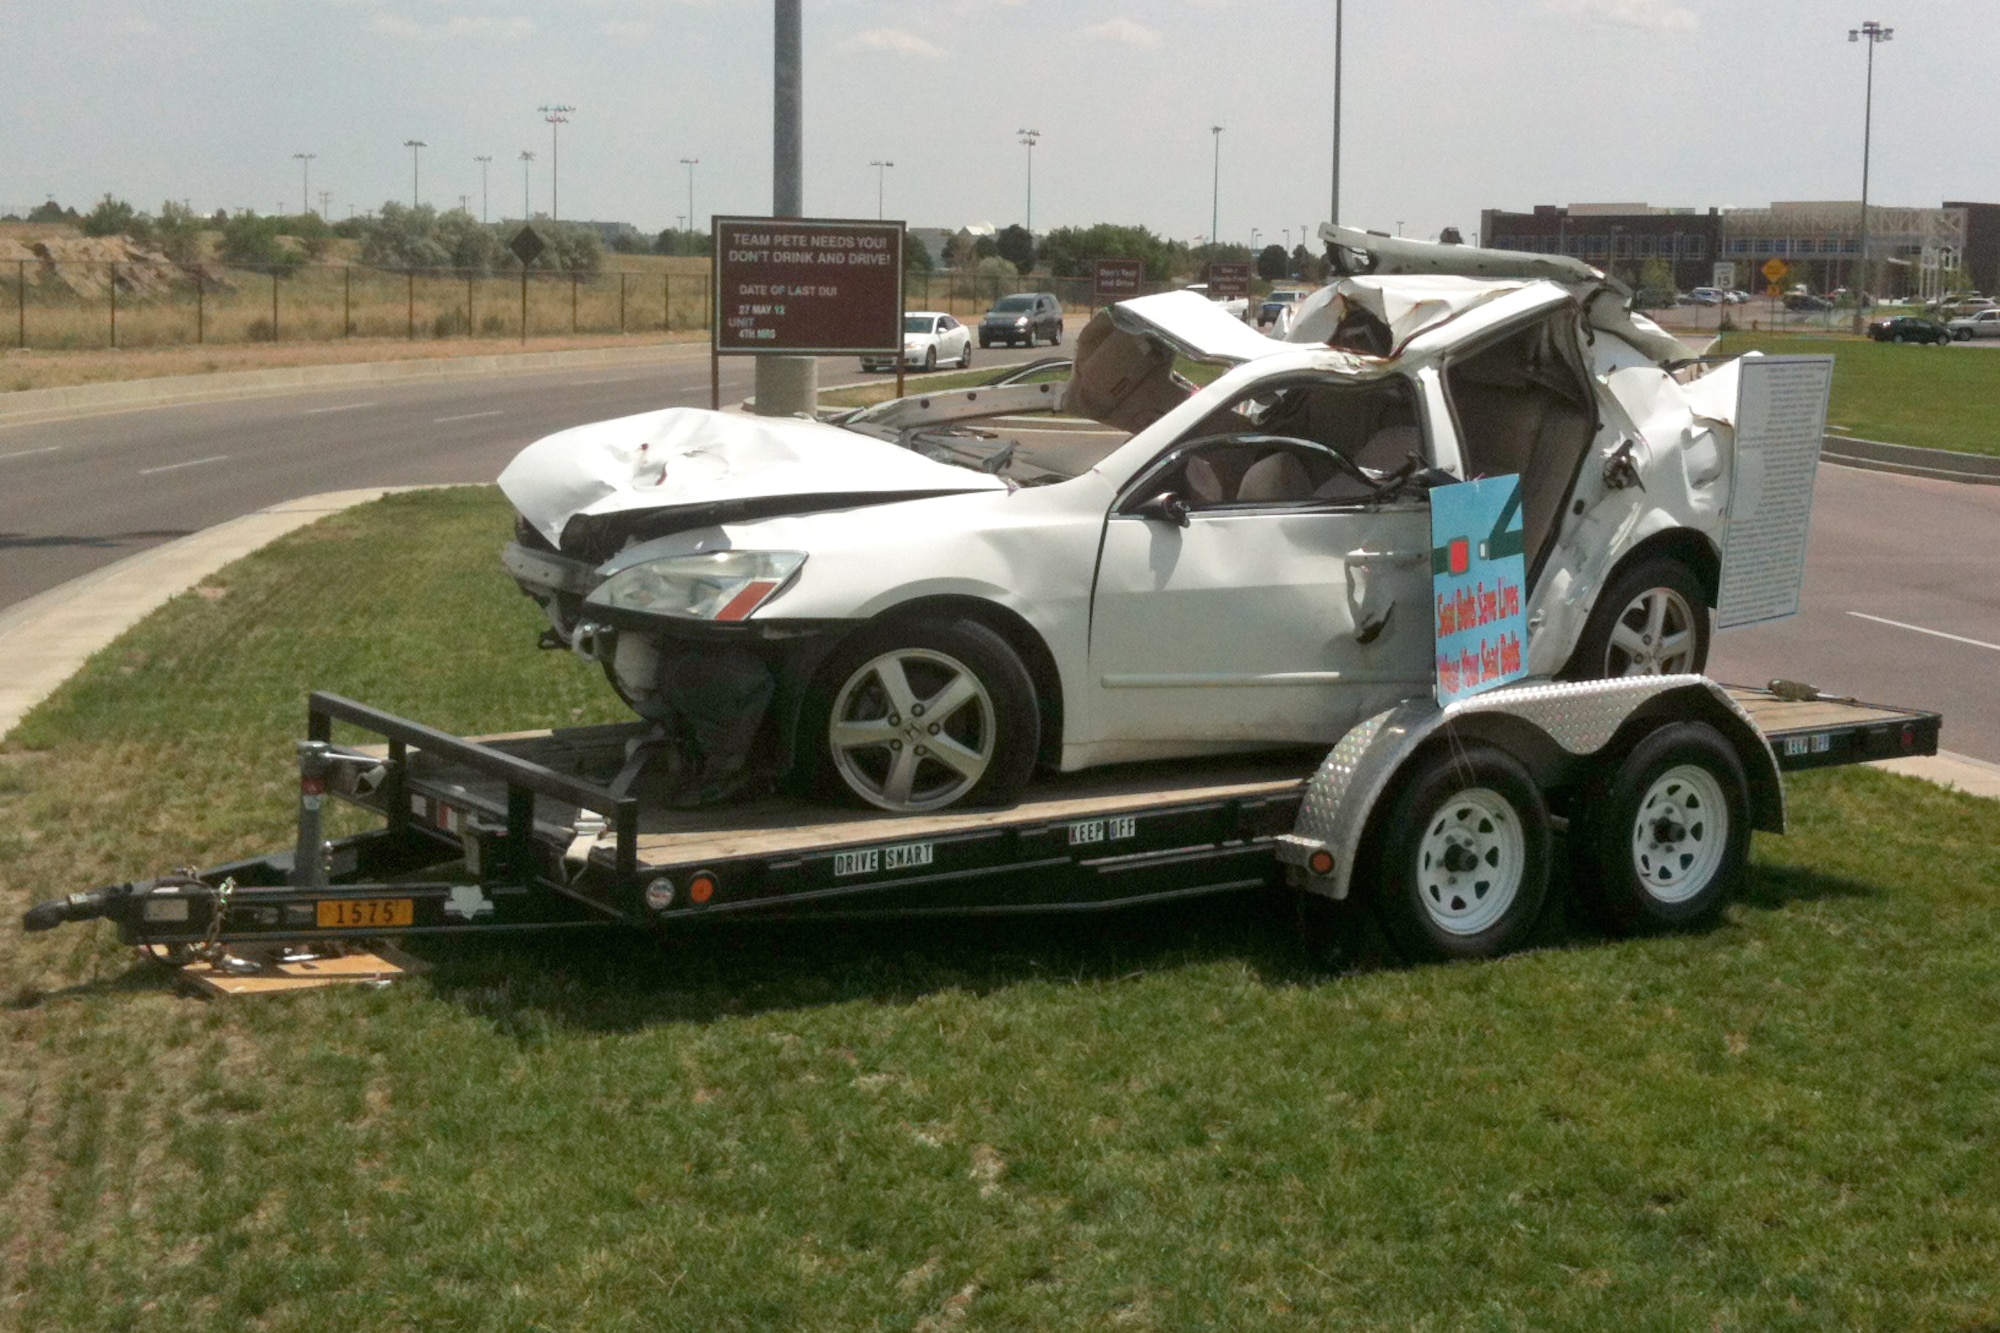 PETERSON AIR FORCE BASE, Colo. - A crashed car is on display at the west gate as part of the Critical Days of Summer campaign. The display is an actual car from a drunk driving accident on loan from Drive Smart Colorado Springs. The purpose of the display is to remind Airmen about the hazards of drinking and driving and the importance of always wearing a seatbelt. (U.S. Air Force photo/Staff Sgt. Trinity Bolman)